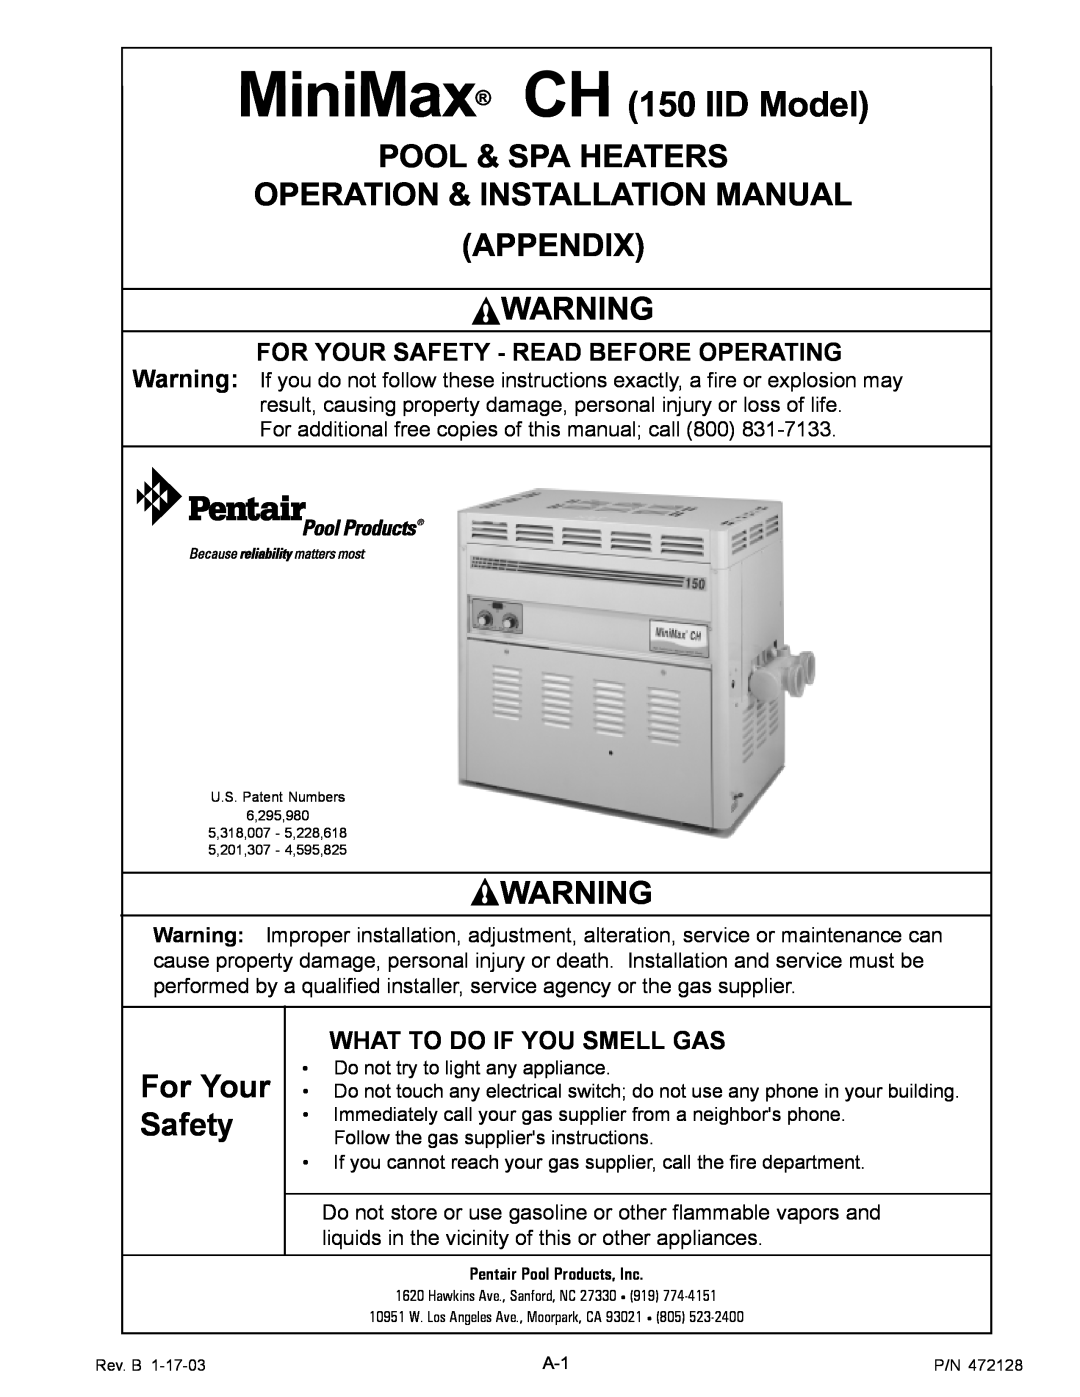 Pentair Appendix, MiniMax CH 150 IID Model, For Your Safety - Read Before Operating, What To Do If You Smell Gas 